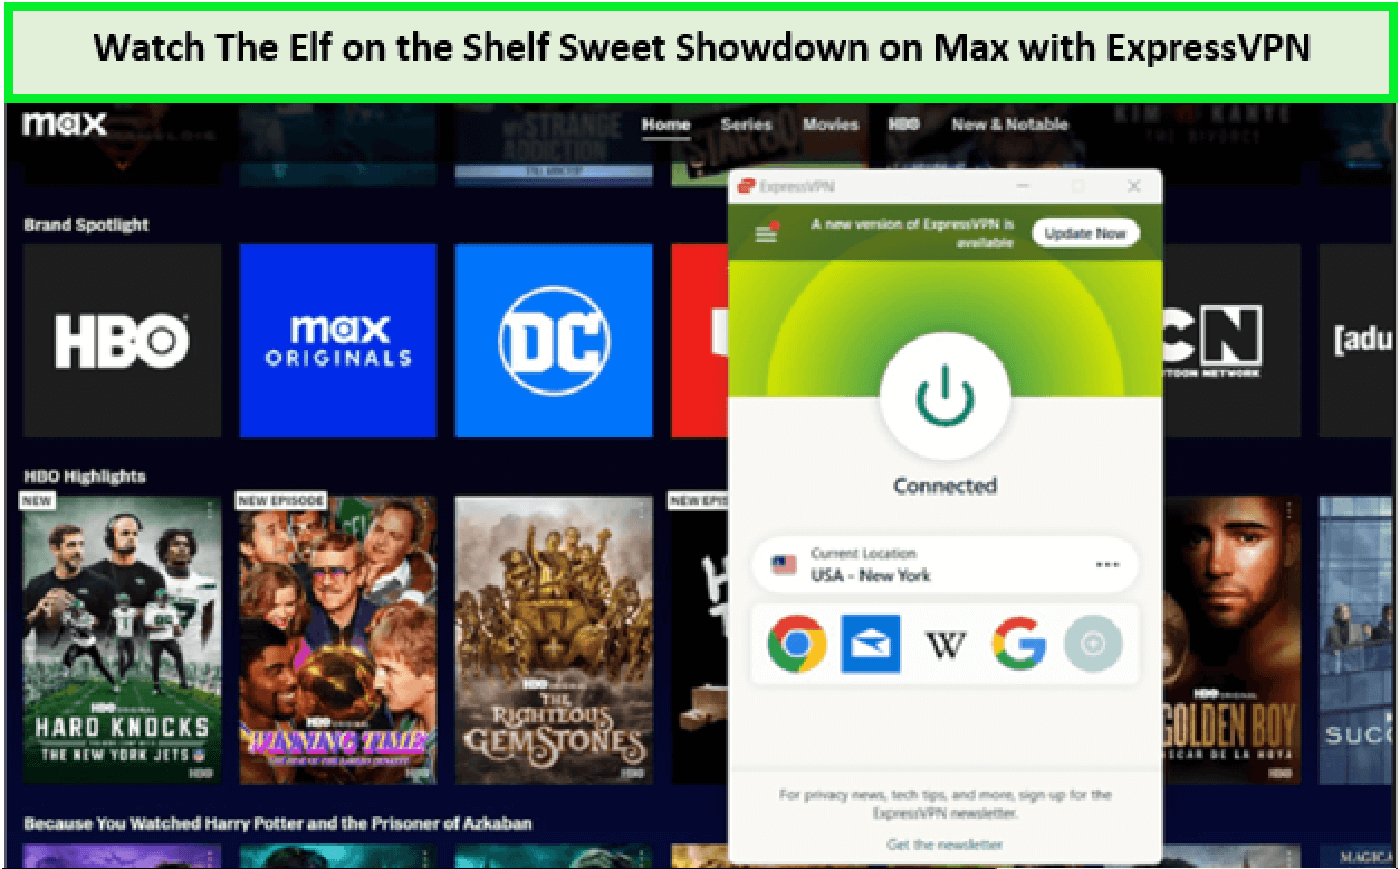 Watch-The-Elf-on-the-Shelf-Sweet-Showdown-in-Italy-on-Max-with-ExpressVPN